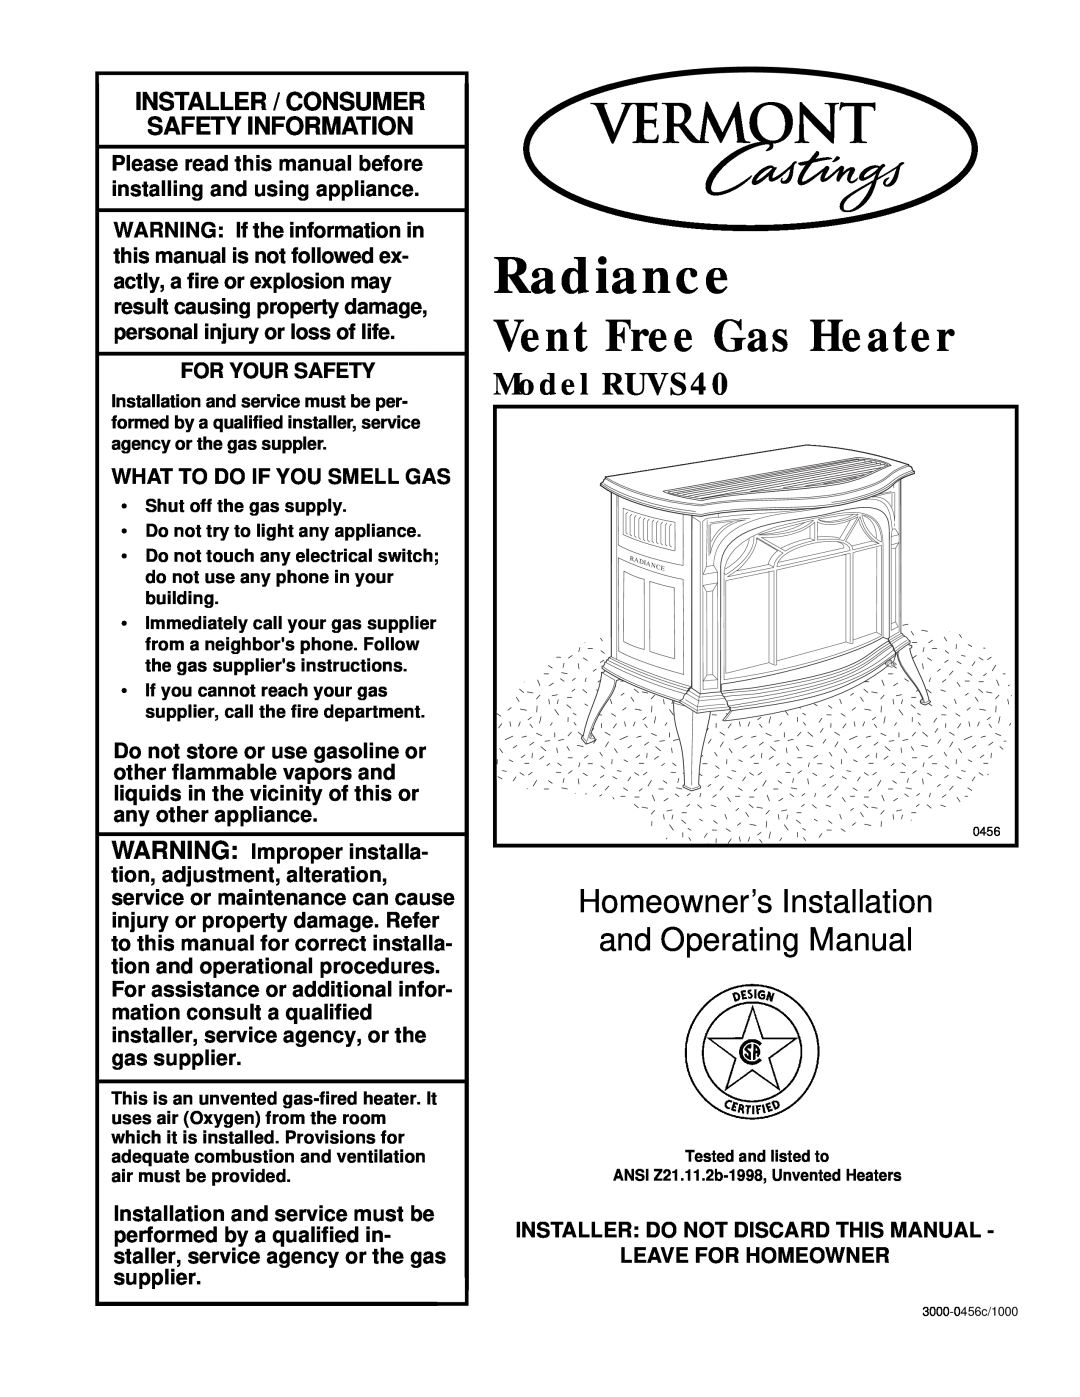 Vermont Casting manual Model RUVS40, Radiance, Vent Free Gas Heater, Homeowner’s Installation and Operating Manual 